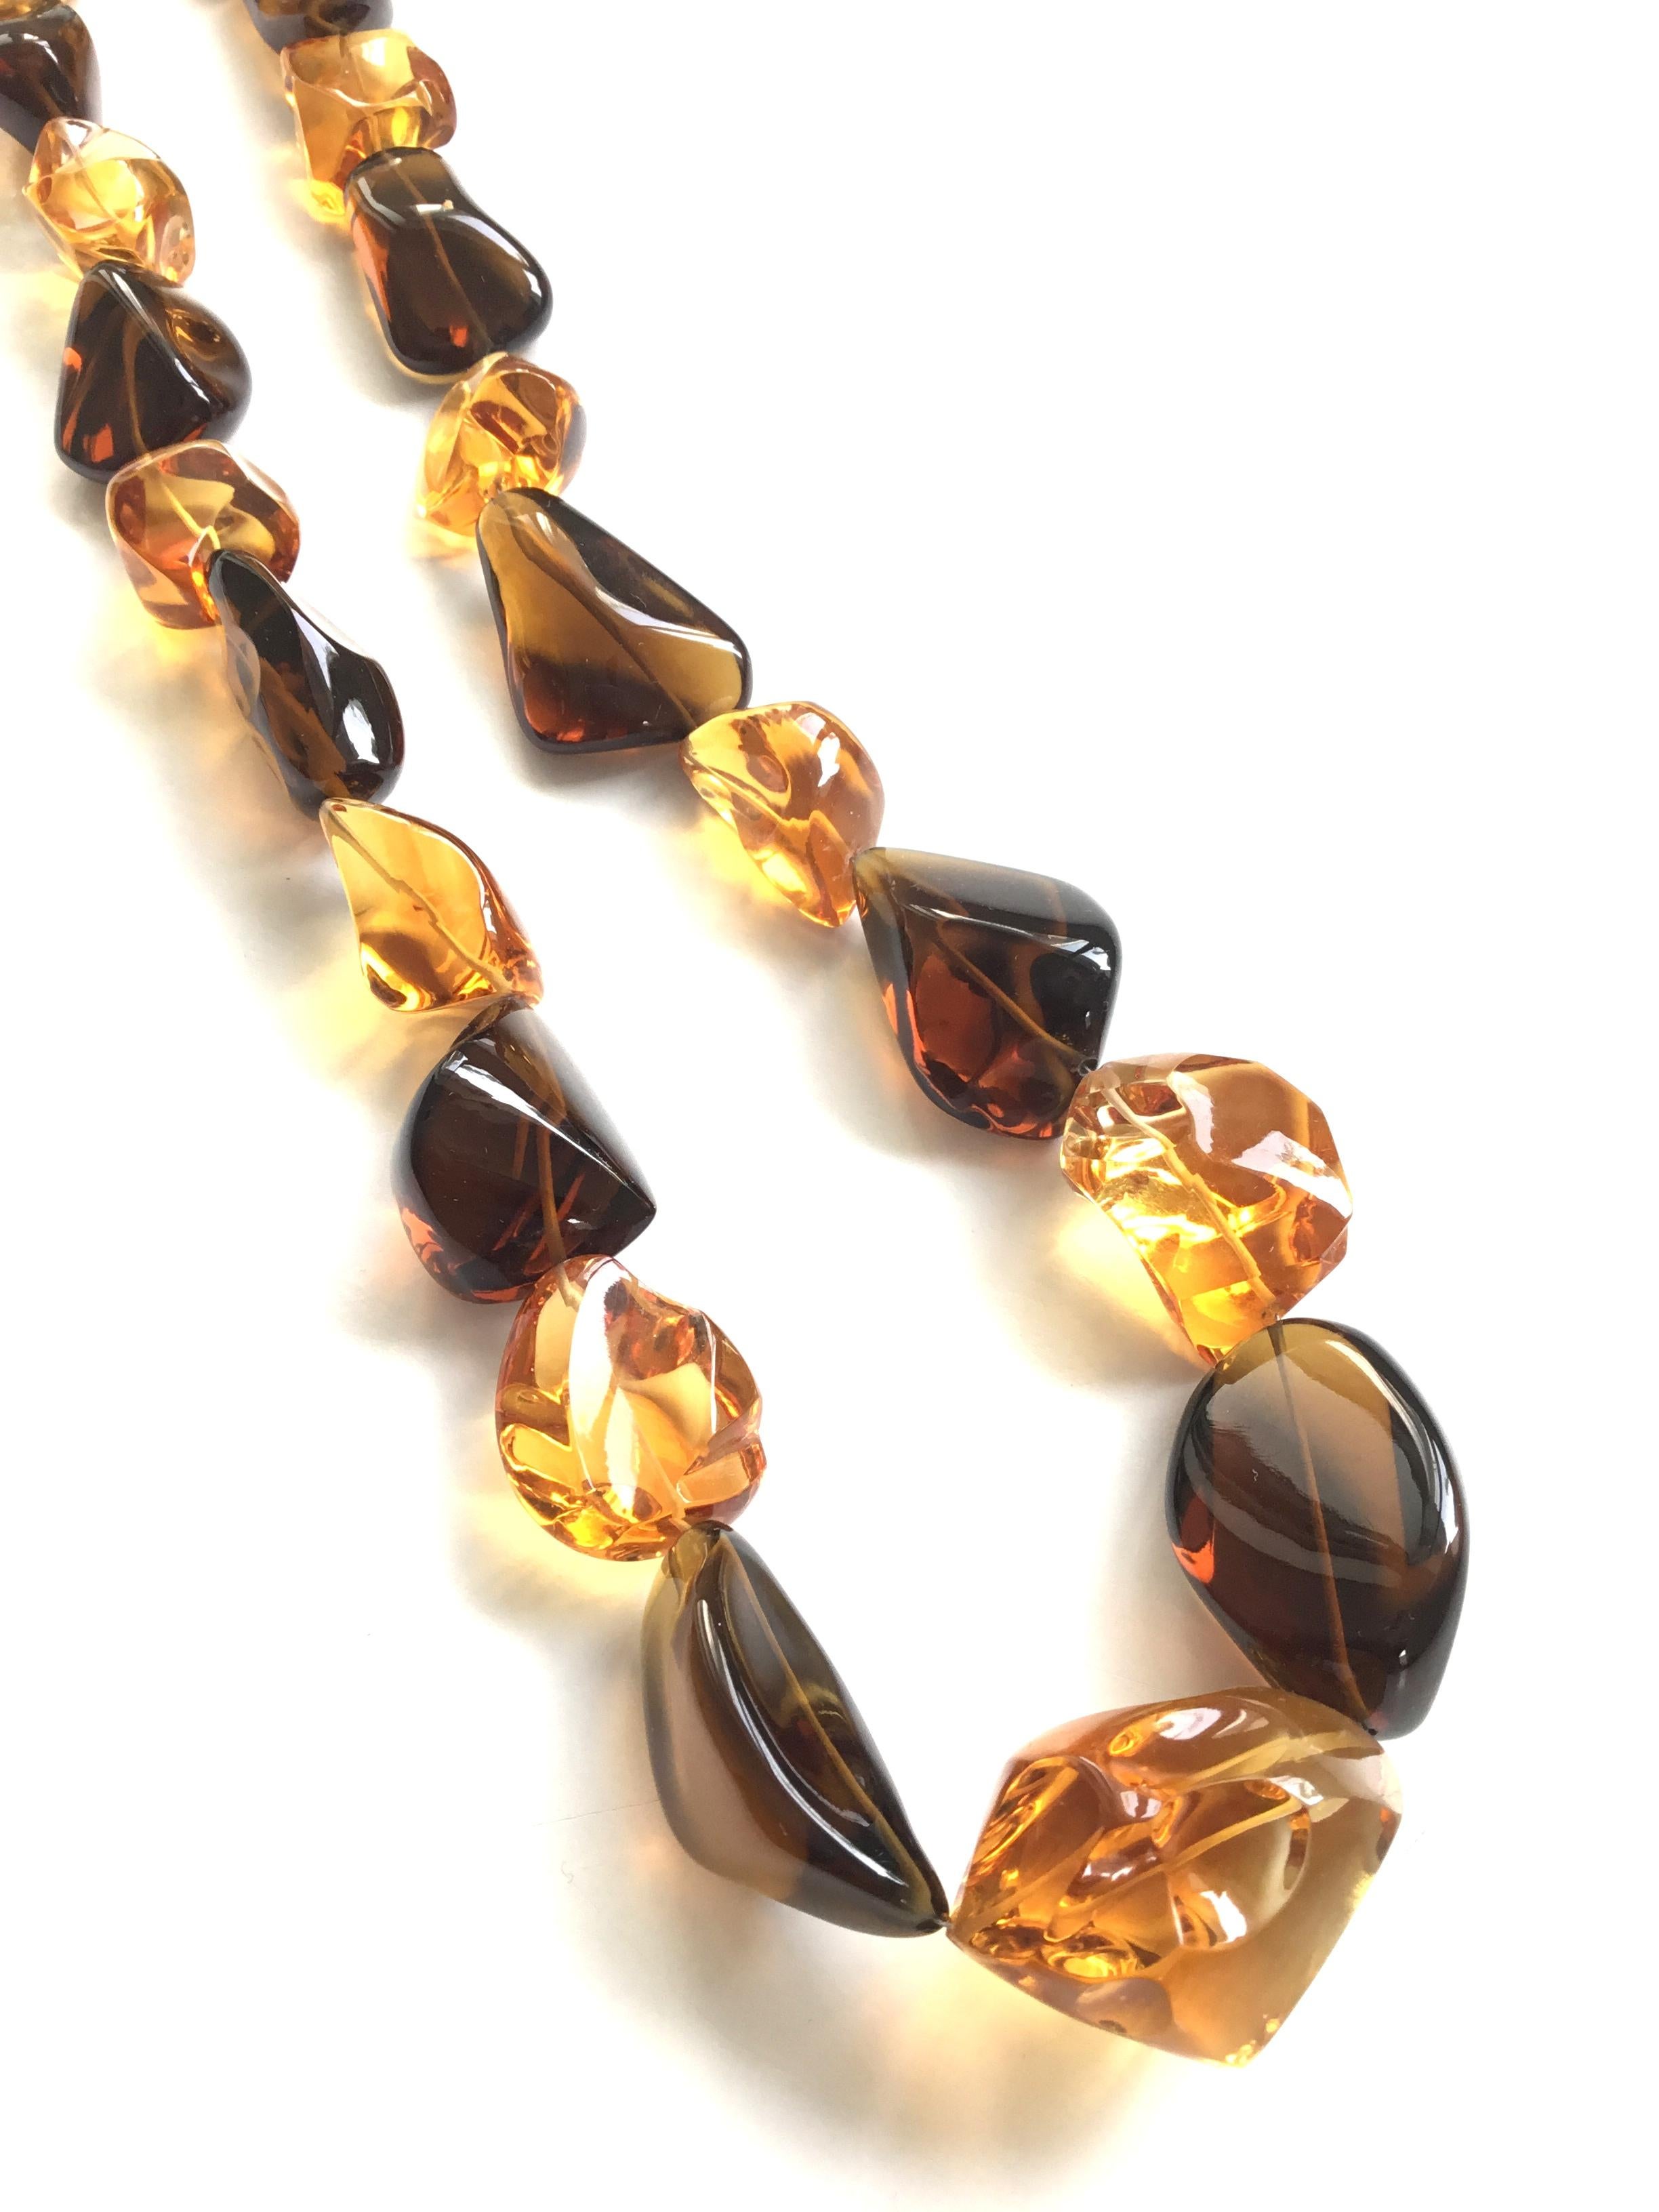 Top Quality Citrine & Beer Quartz Plain Tumbled Natural Gemstone Necklace 
Size : 15 X 17 To 25 x 33 MM Beads
Weight : 891.55 Carats
Length Of Necklace : 18 Inches